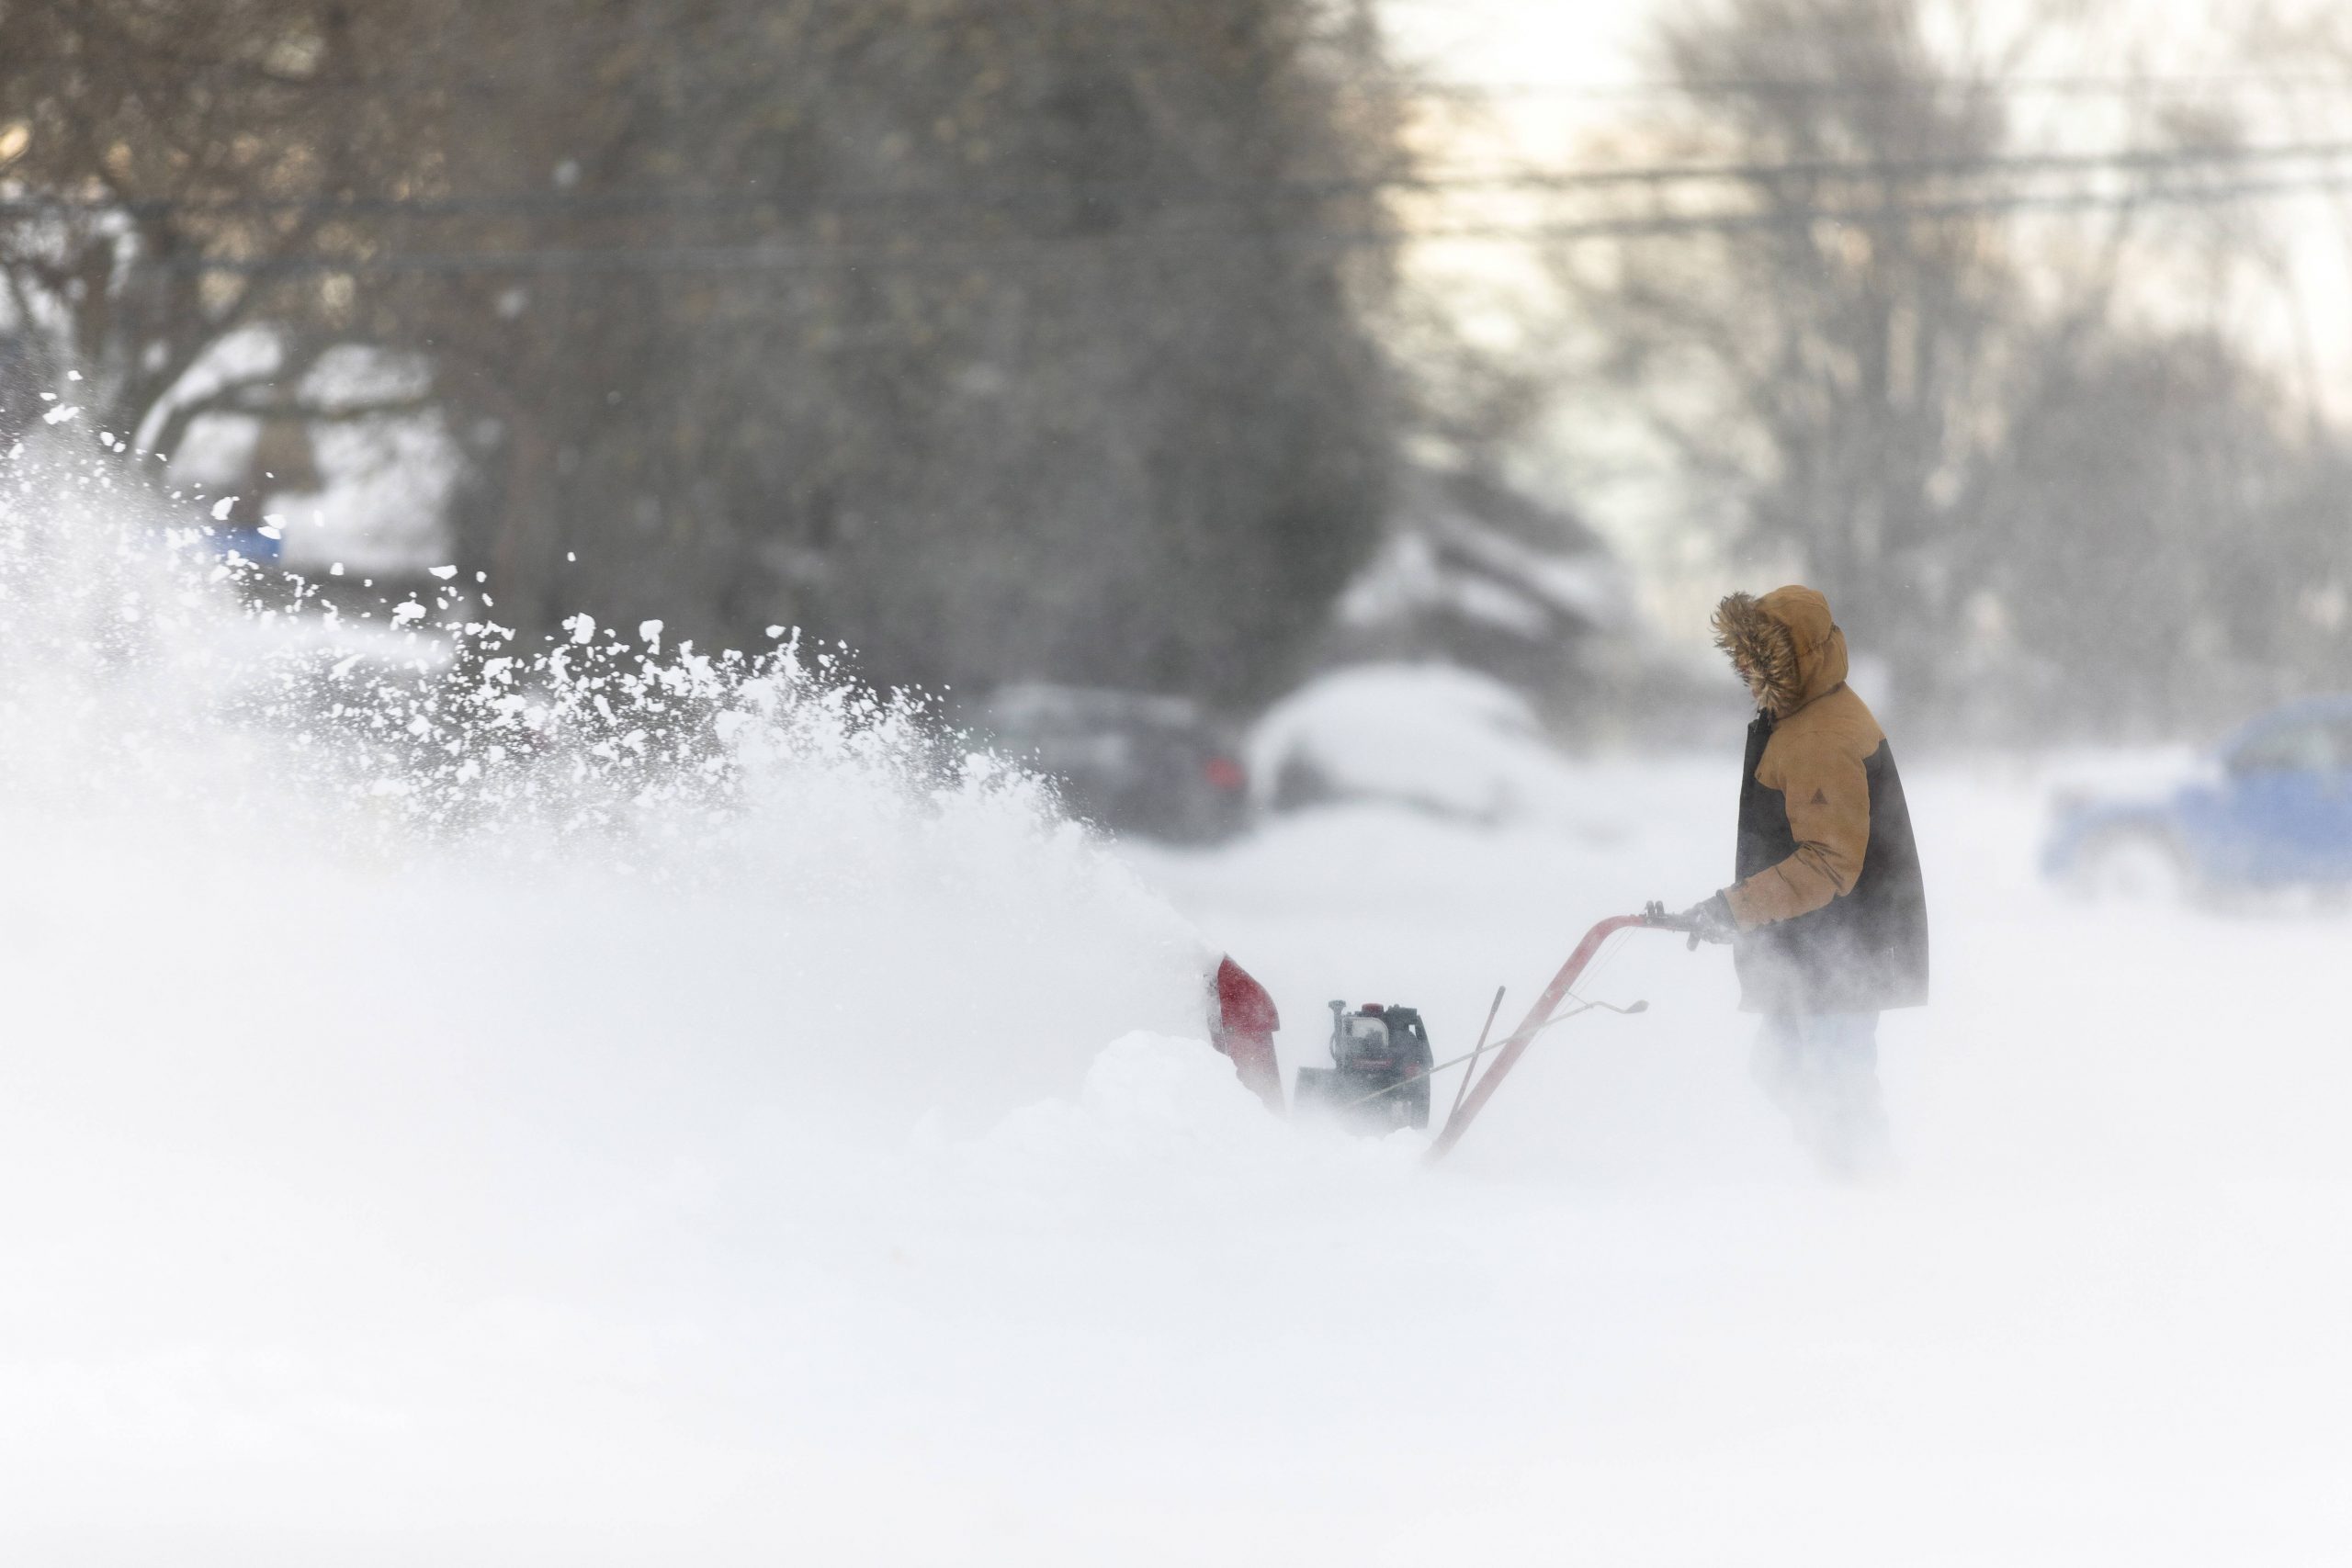 November 19, 2022, Fort Erie, ON, Canada: A man uses a snowblower in Fort Erie, Ont., during an early winter storm that delivered high winds and large amounts of snow across southern Ontario and western New York, Saturday, Nov. 19, 2022. Fort Erie Canada PUBLICATIONxINxGERxSUIxAUTxONLY - ZUMAc35_ 20221119_zaf_c35_121 Copyright: xNickxIwanyshynx